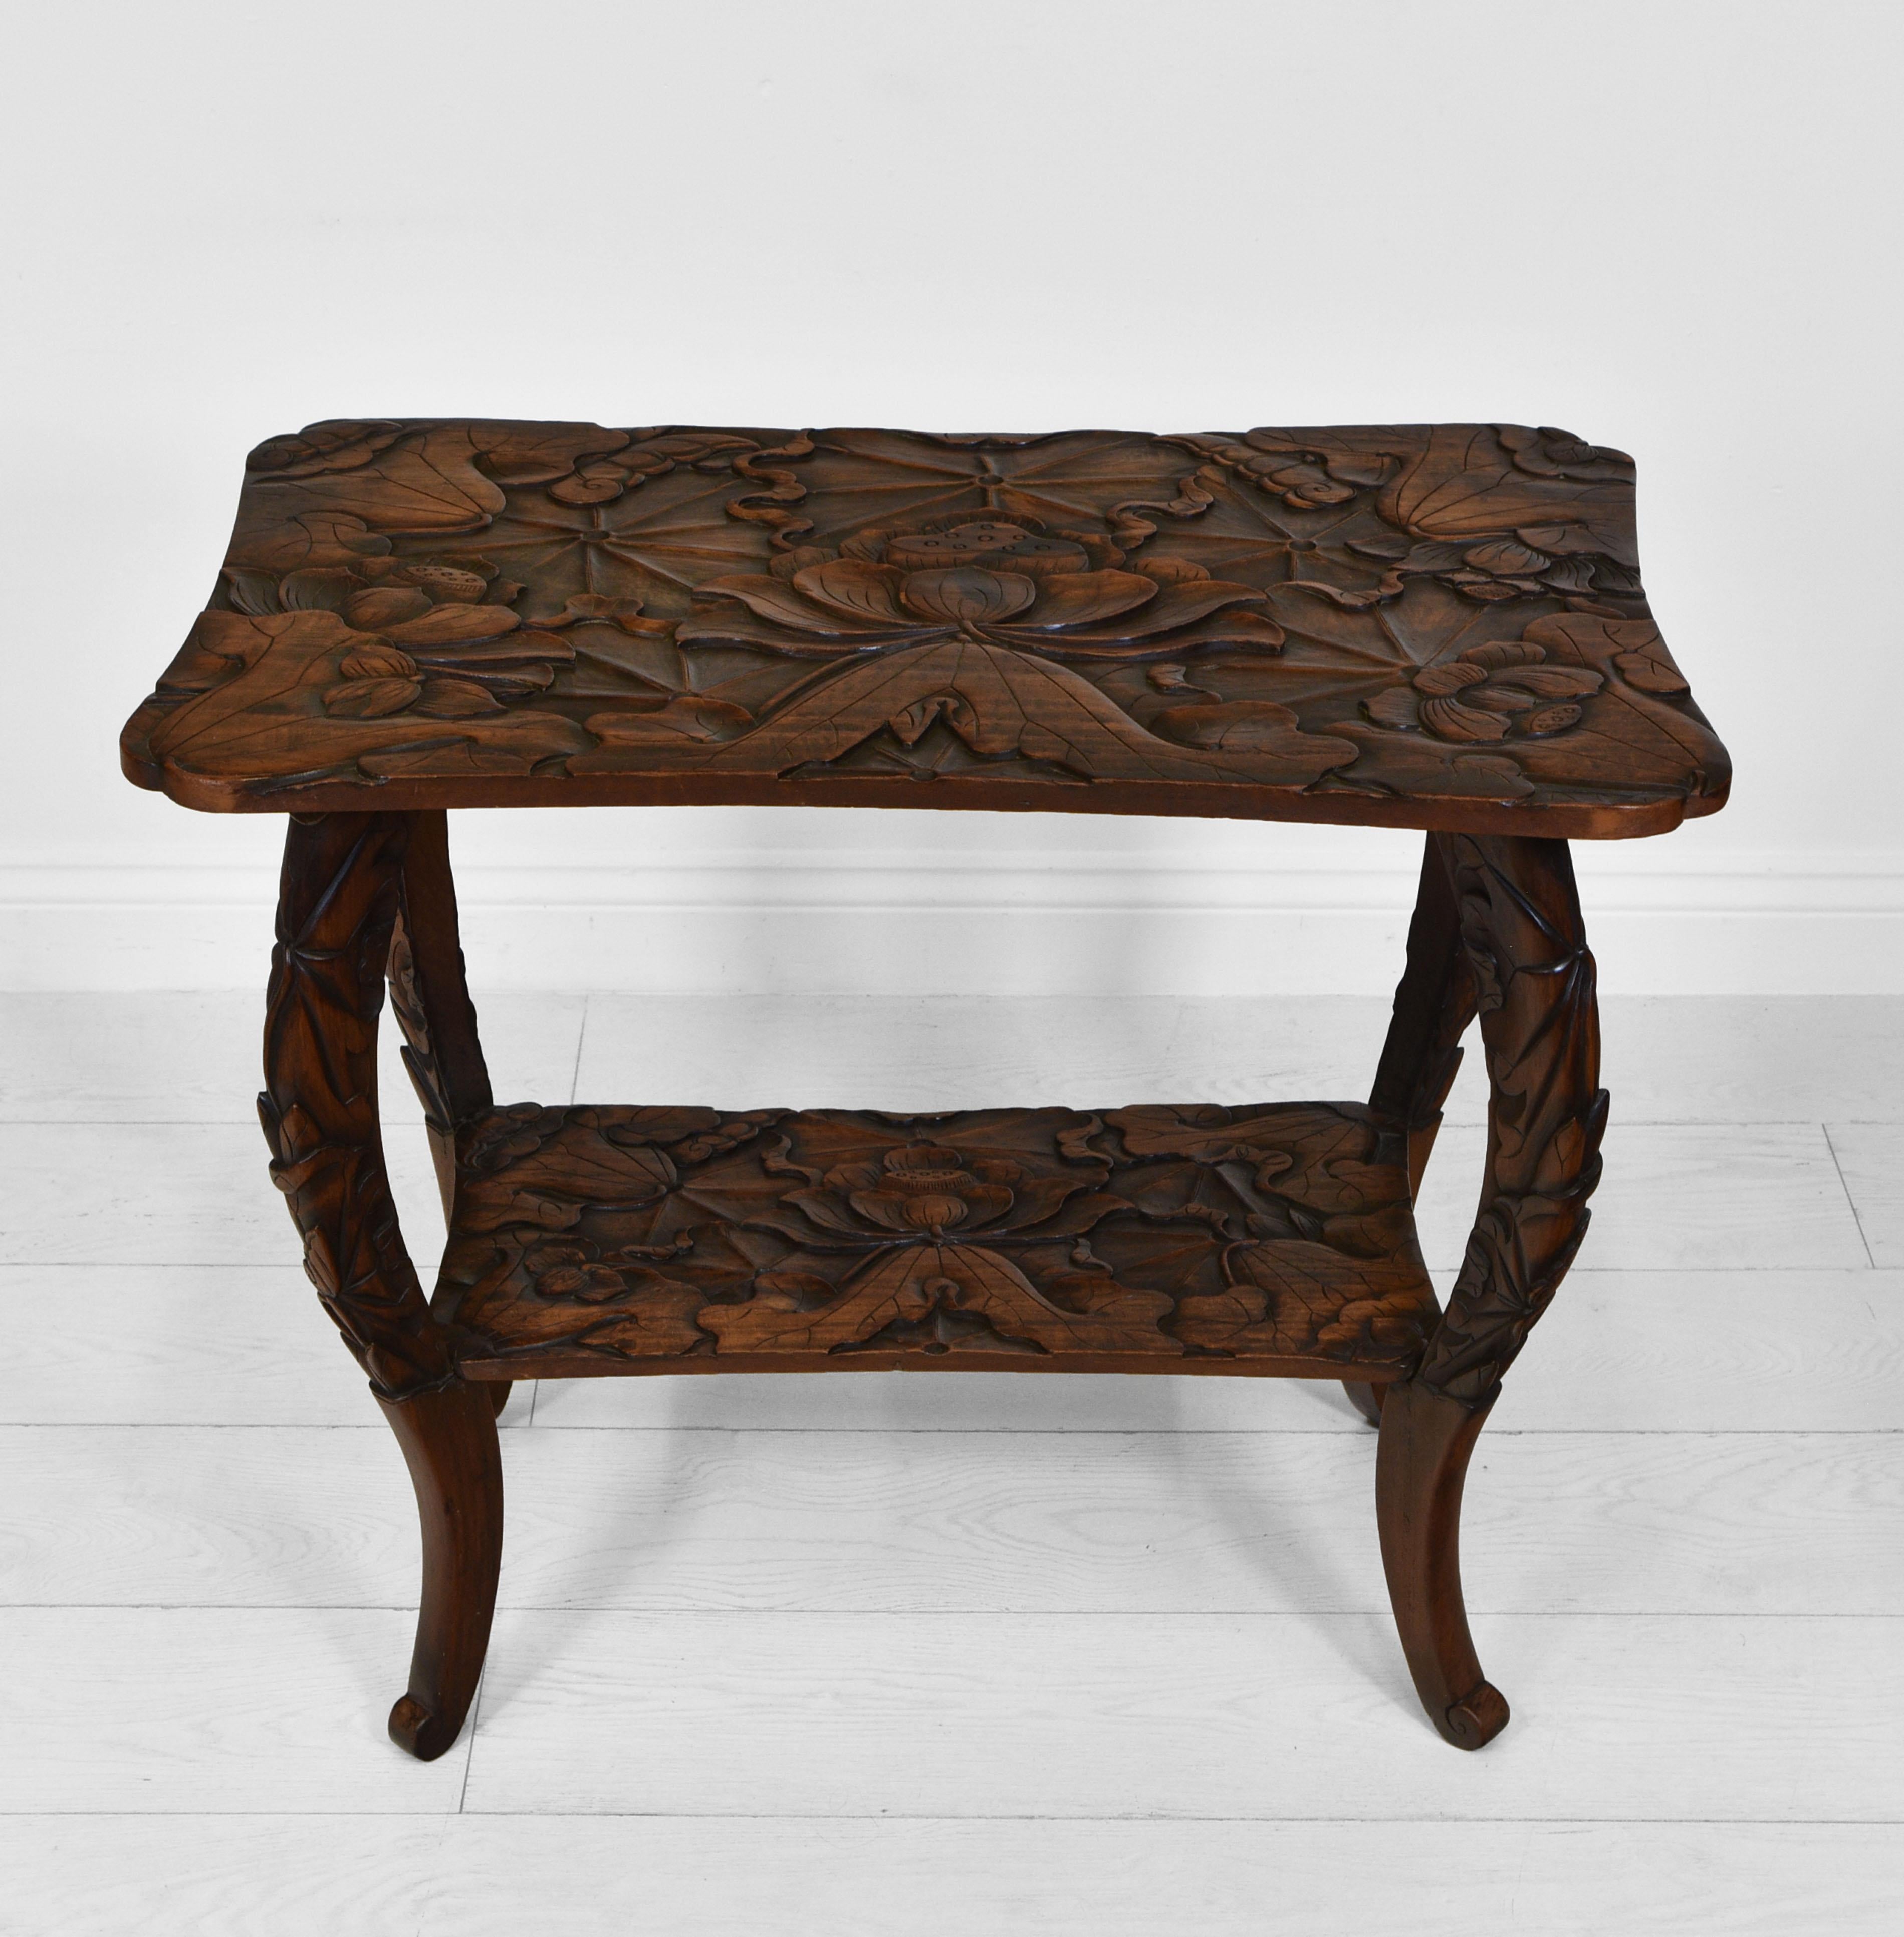 A Japanese fruitwood carved side table, retailed by Liberty & Co. Circa 1900.

These tables were commissioned by Liberty & Co, and hand-carved in Japan. The firm imported Middle Eastern and Oriental goods sympathetic to the ideals of the Art